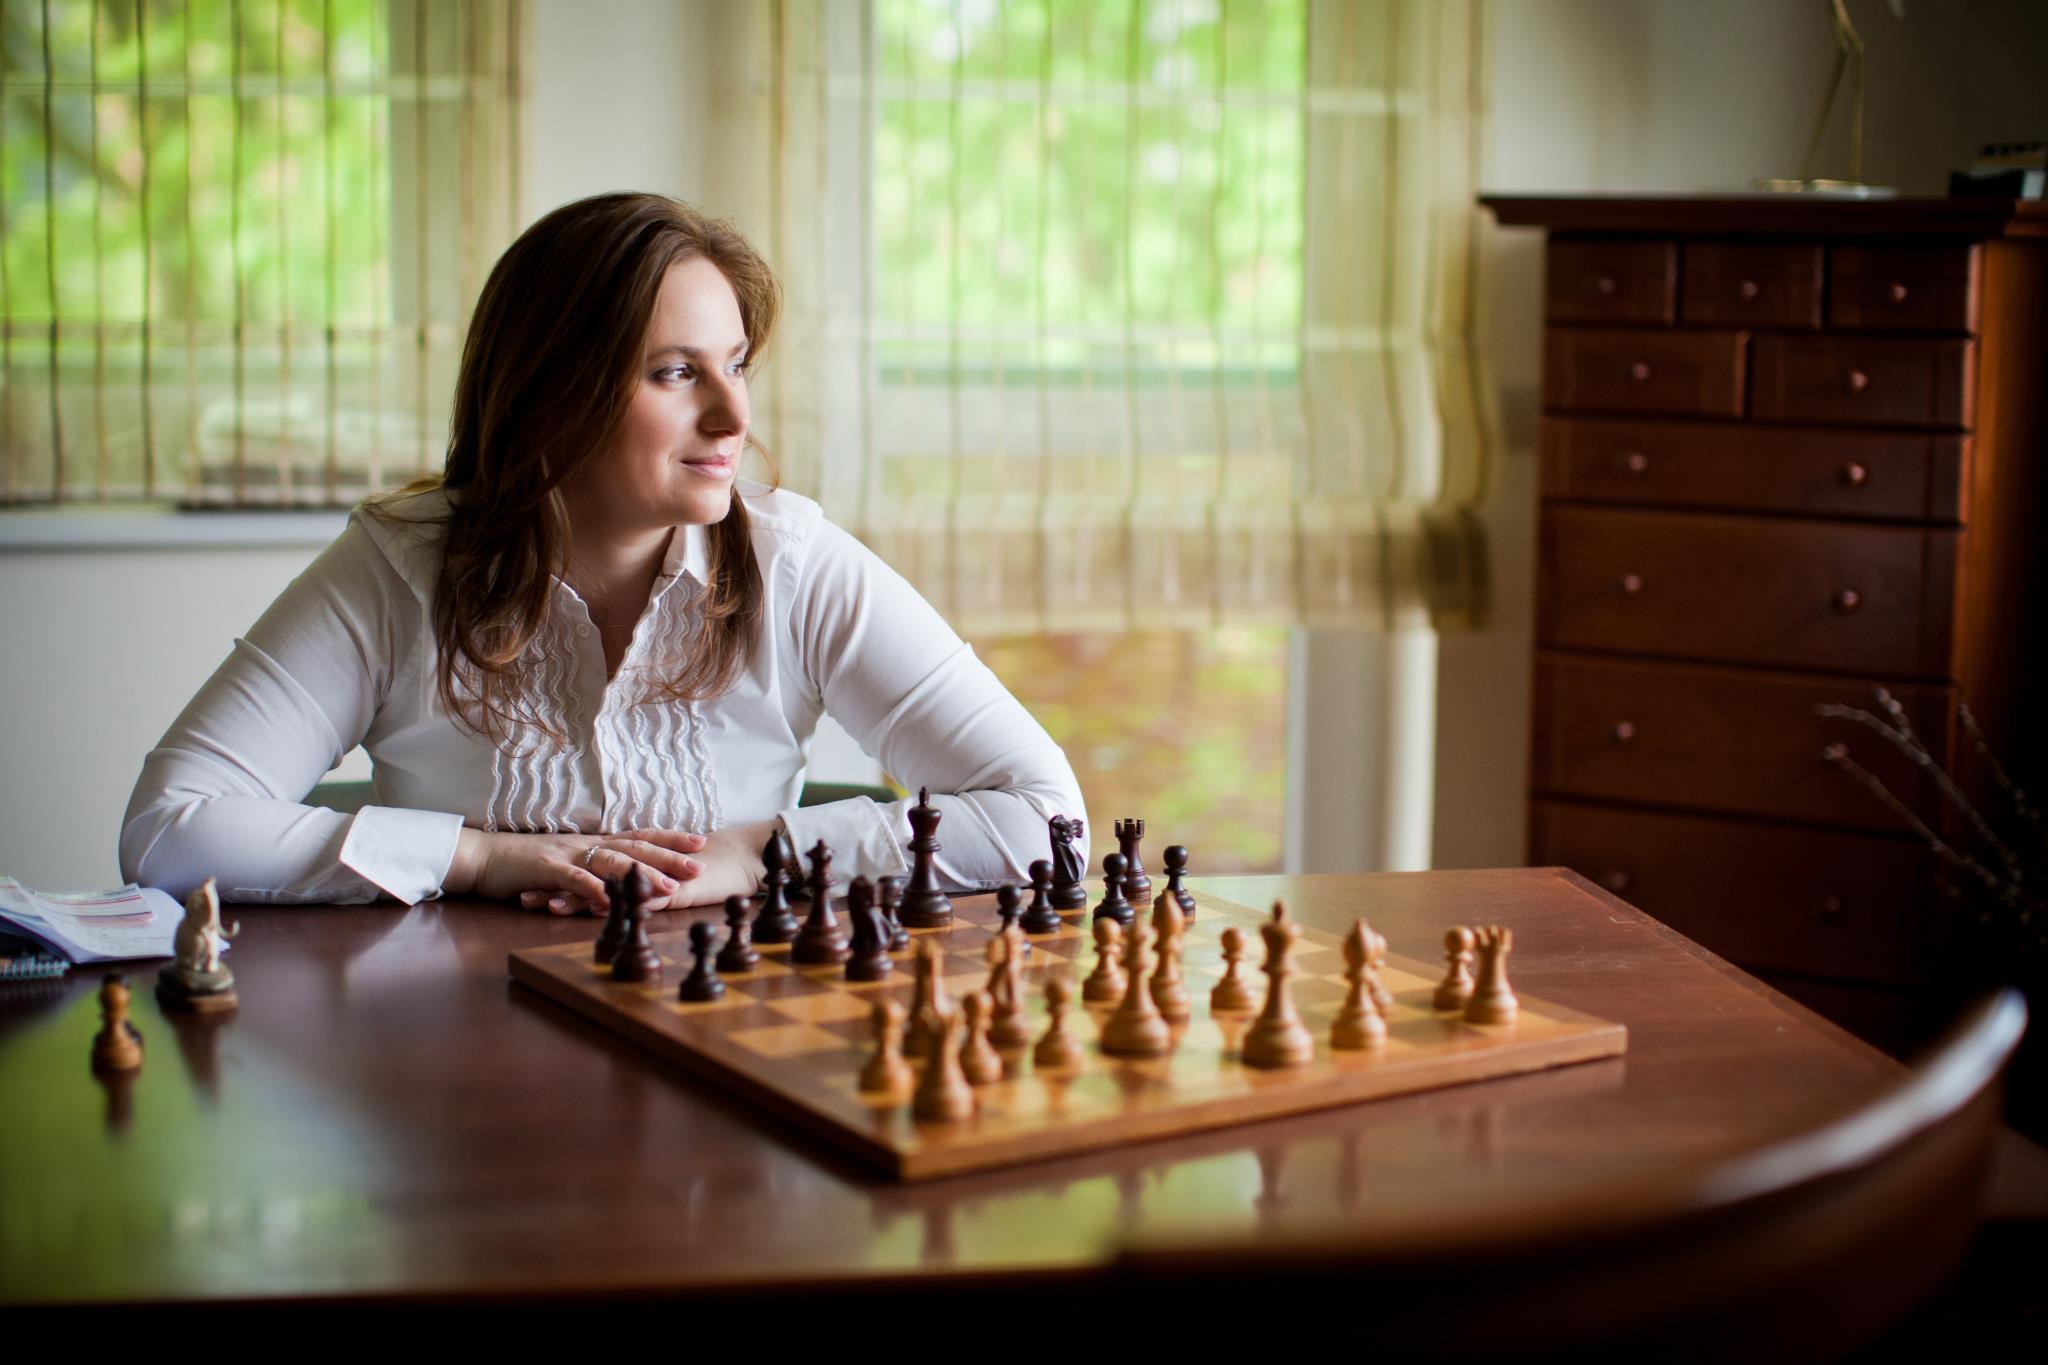 Who is Judit Polgar and how much did she earn from chess?